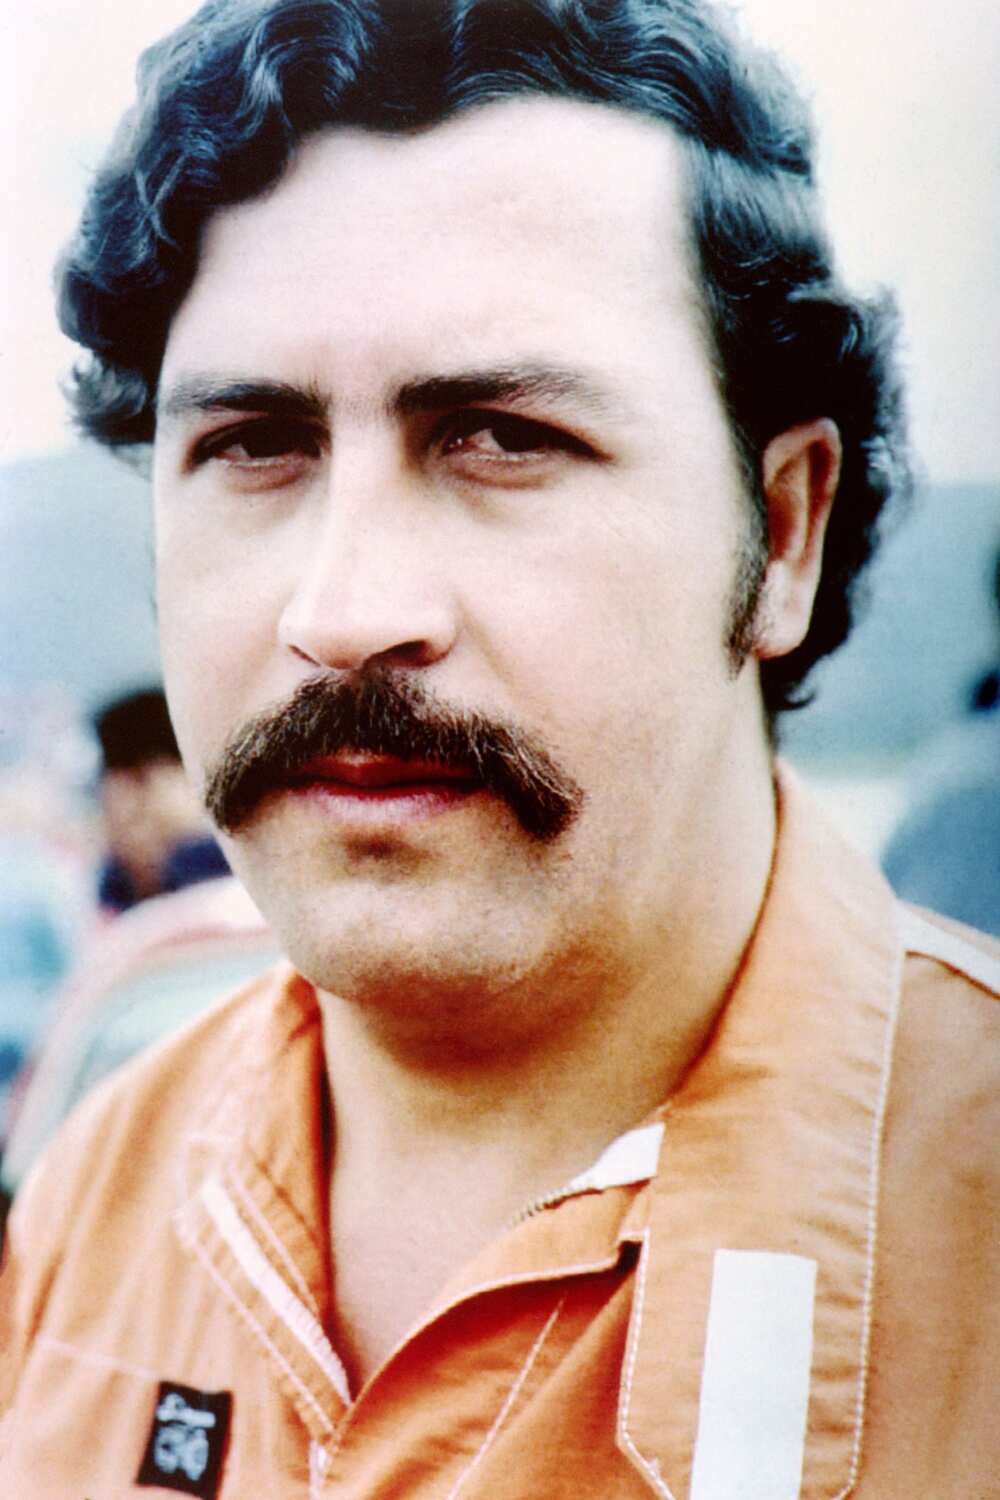 Is there still money from Pablo Escobar?